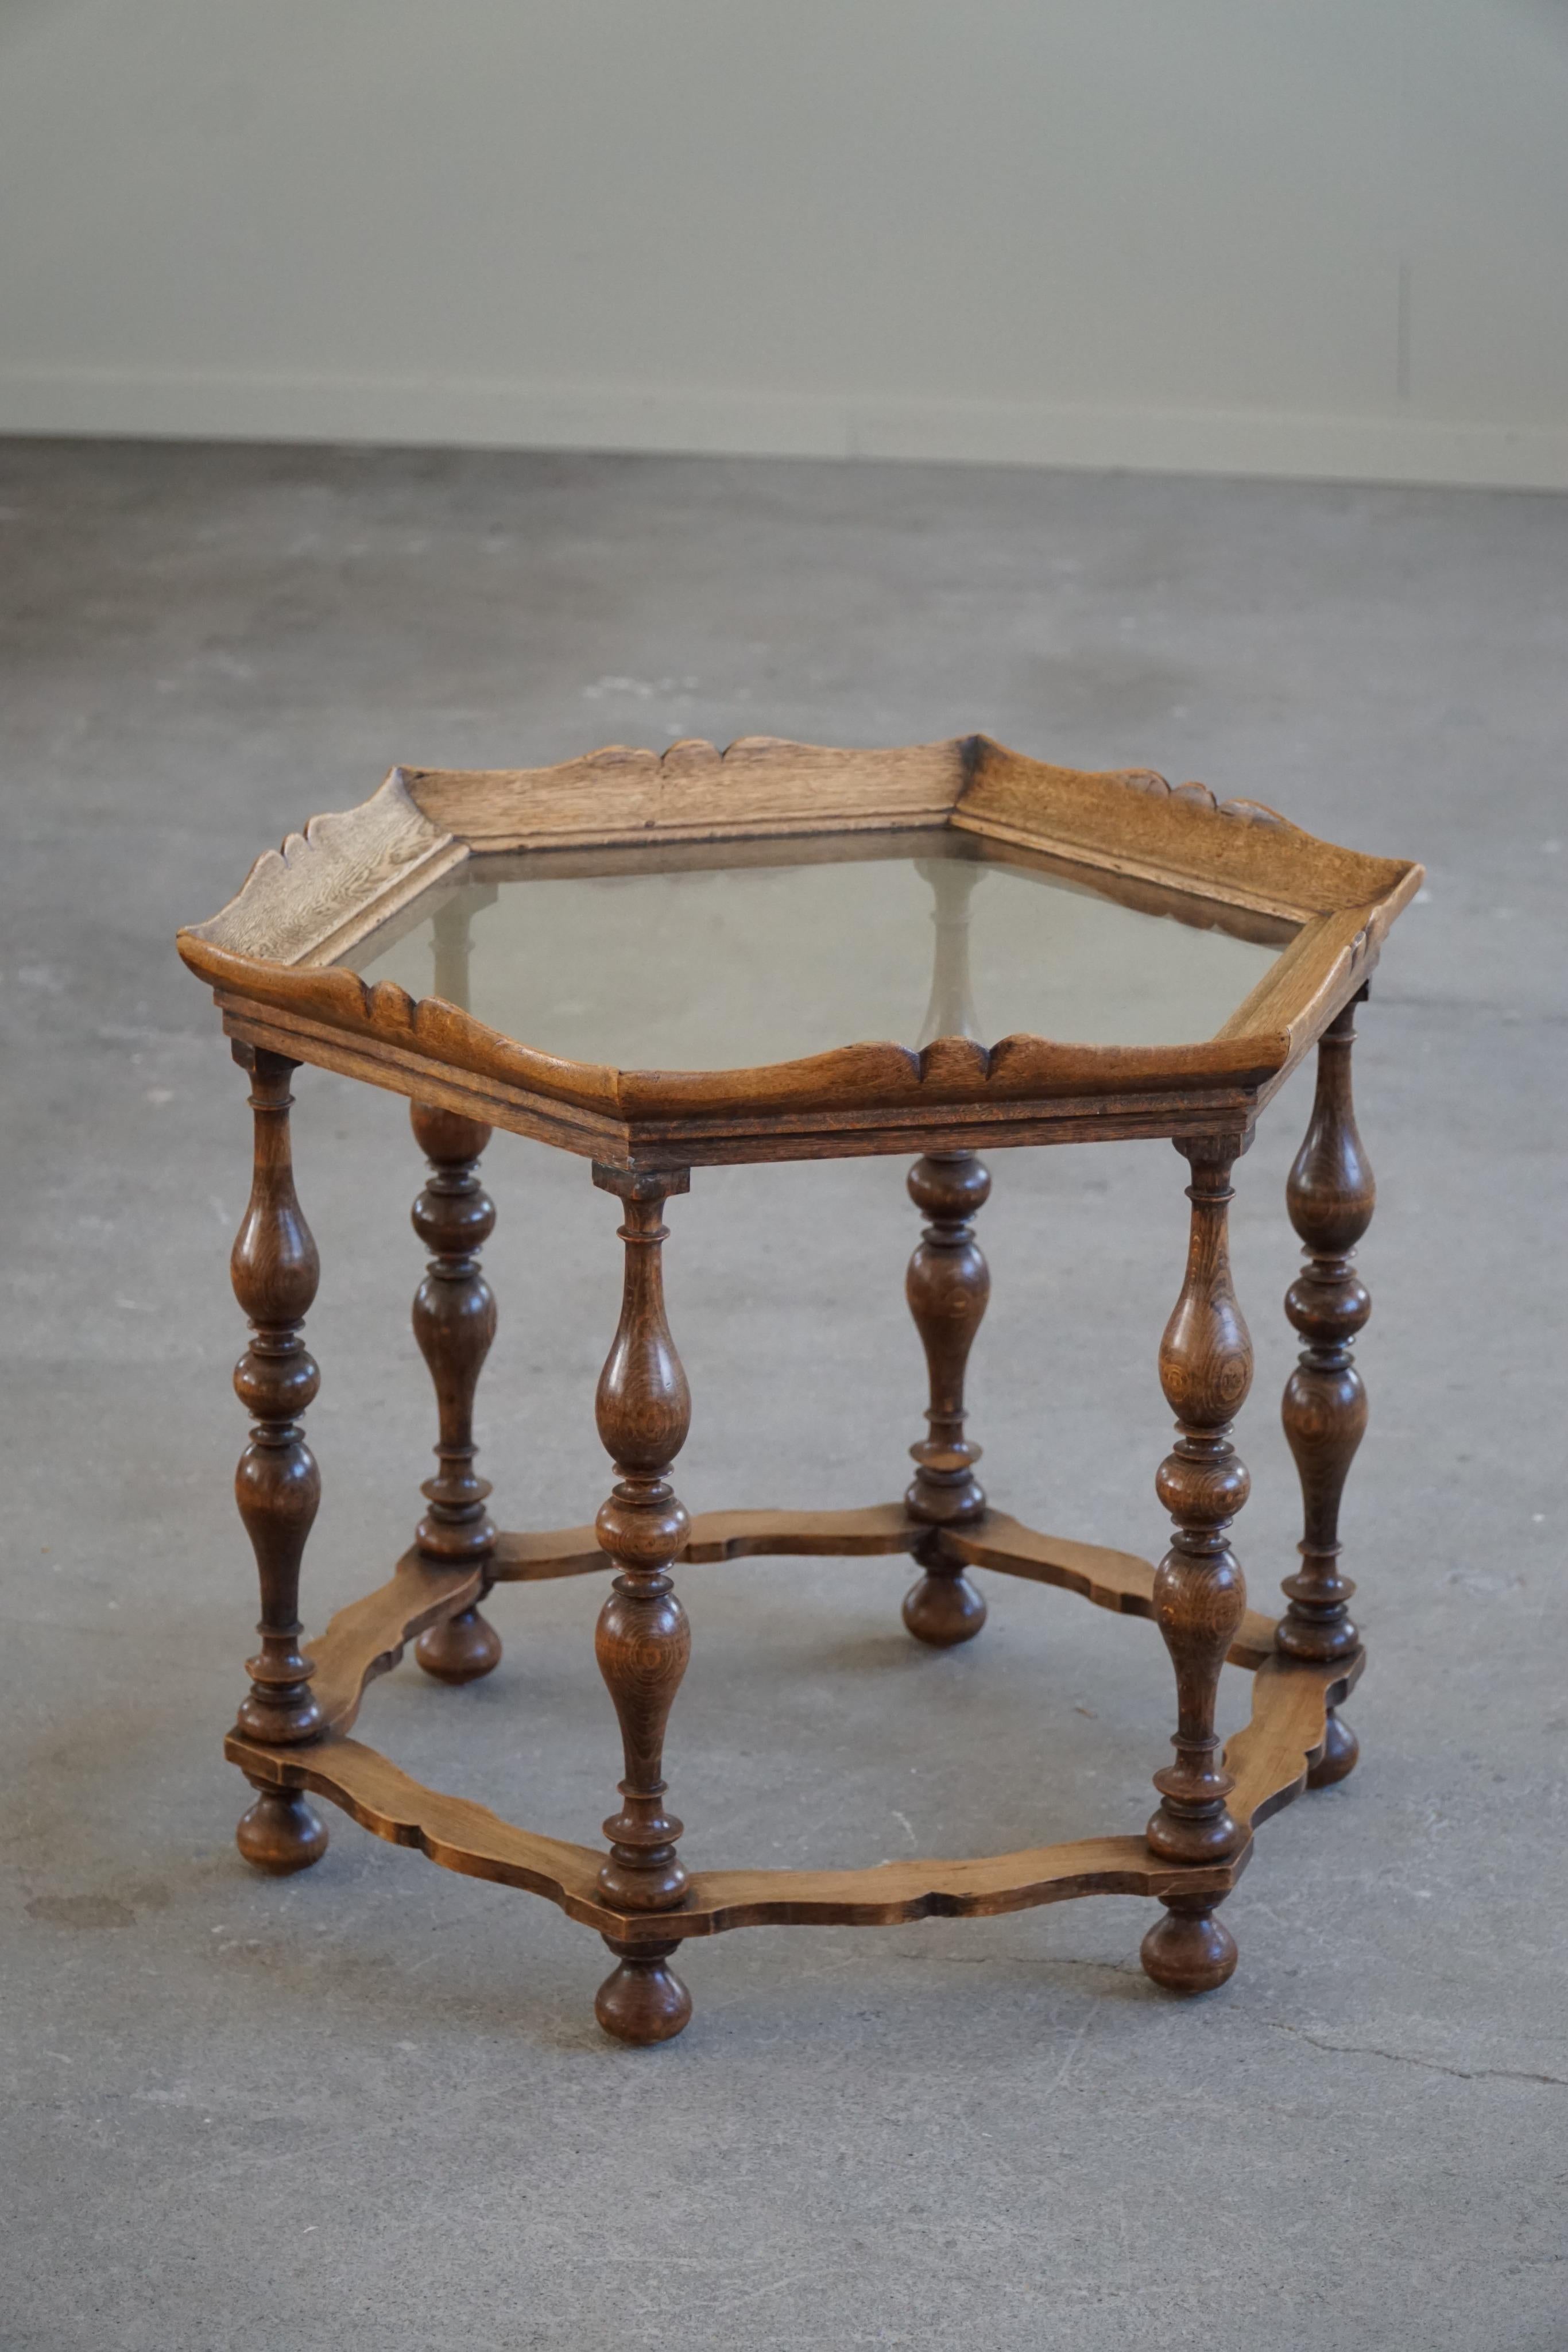 Sculptural Baroque Style Hexagon Side Table, By a Danish Cabinetmaker, 1930s For Sale 3